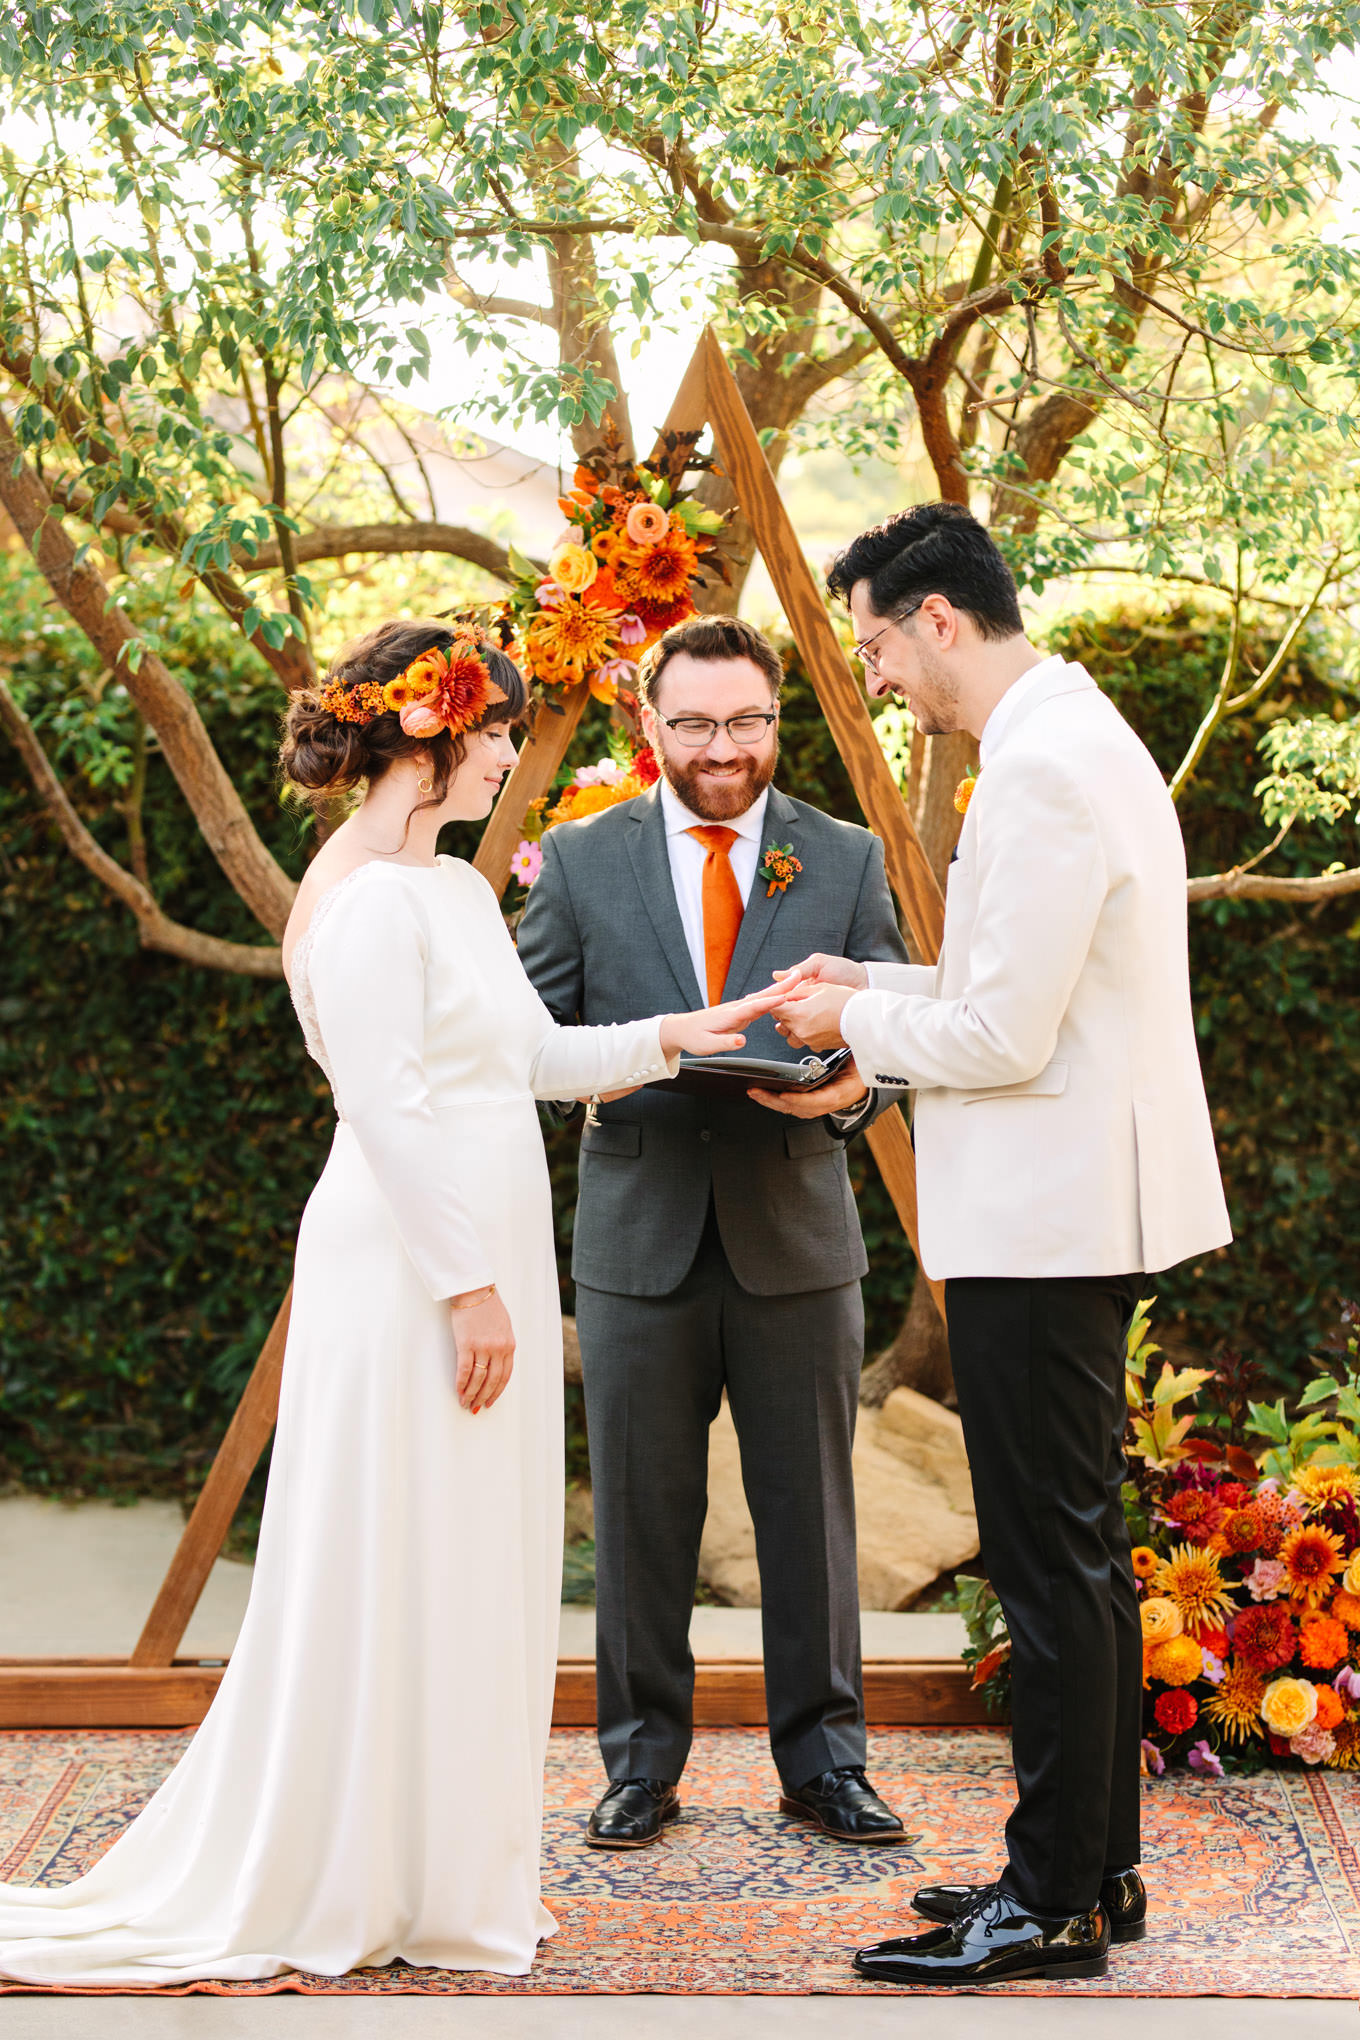 Bride and groom exchanging rings | Vibrant backyard micro wedding featured on Green Wedding Shoes | Colorful LA wedding photography | #losangeleswedding #backyardwedding #microwedding #laweddingphotographer Source: Mary Costa Photography | Los Angeles